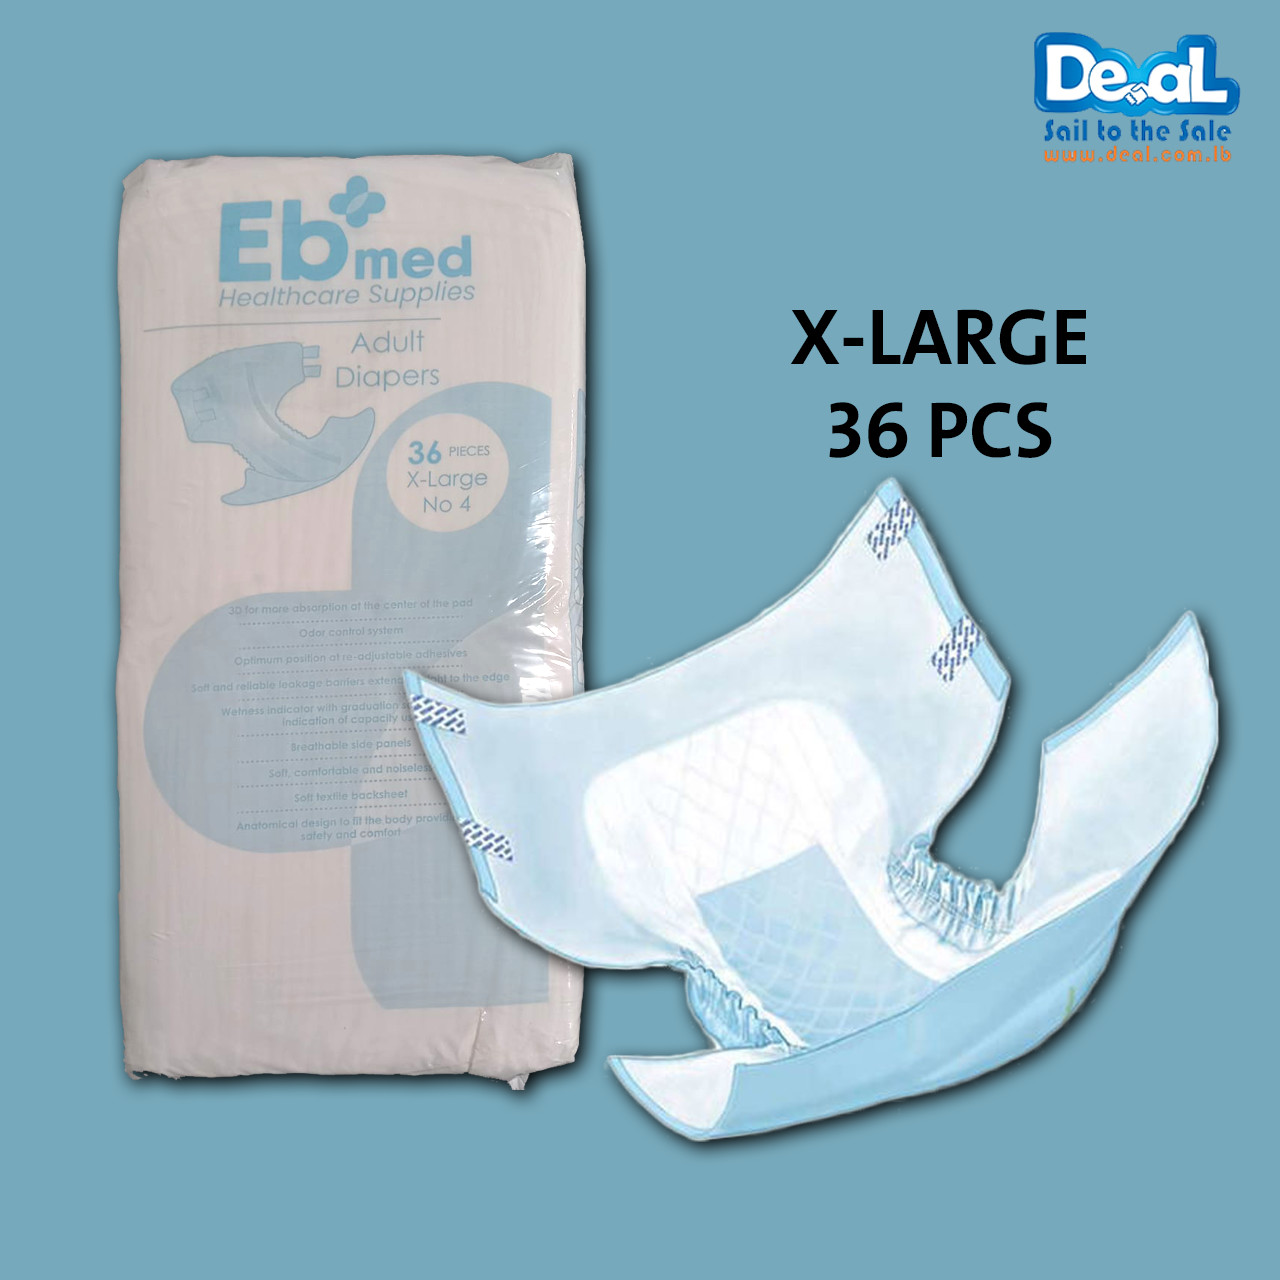 Eb+med+Adult+Diapers+36+Pieces+%7C+X-Large+Size